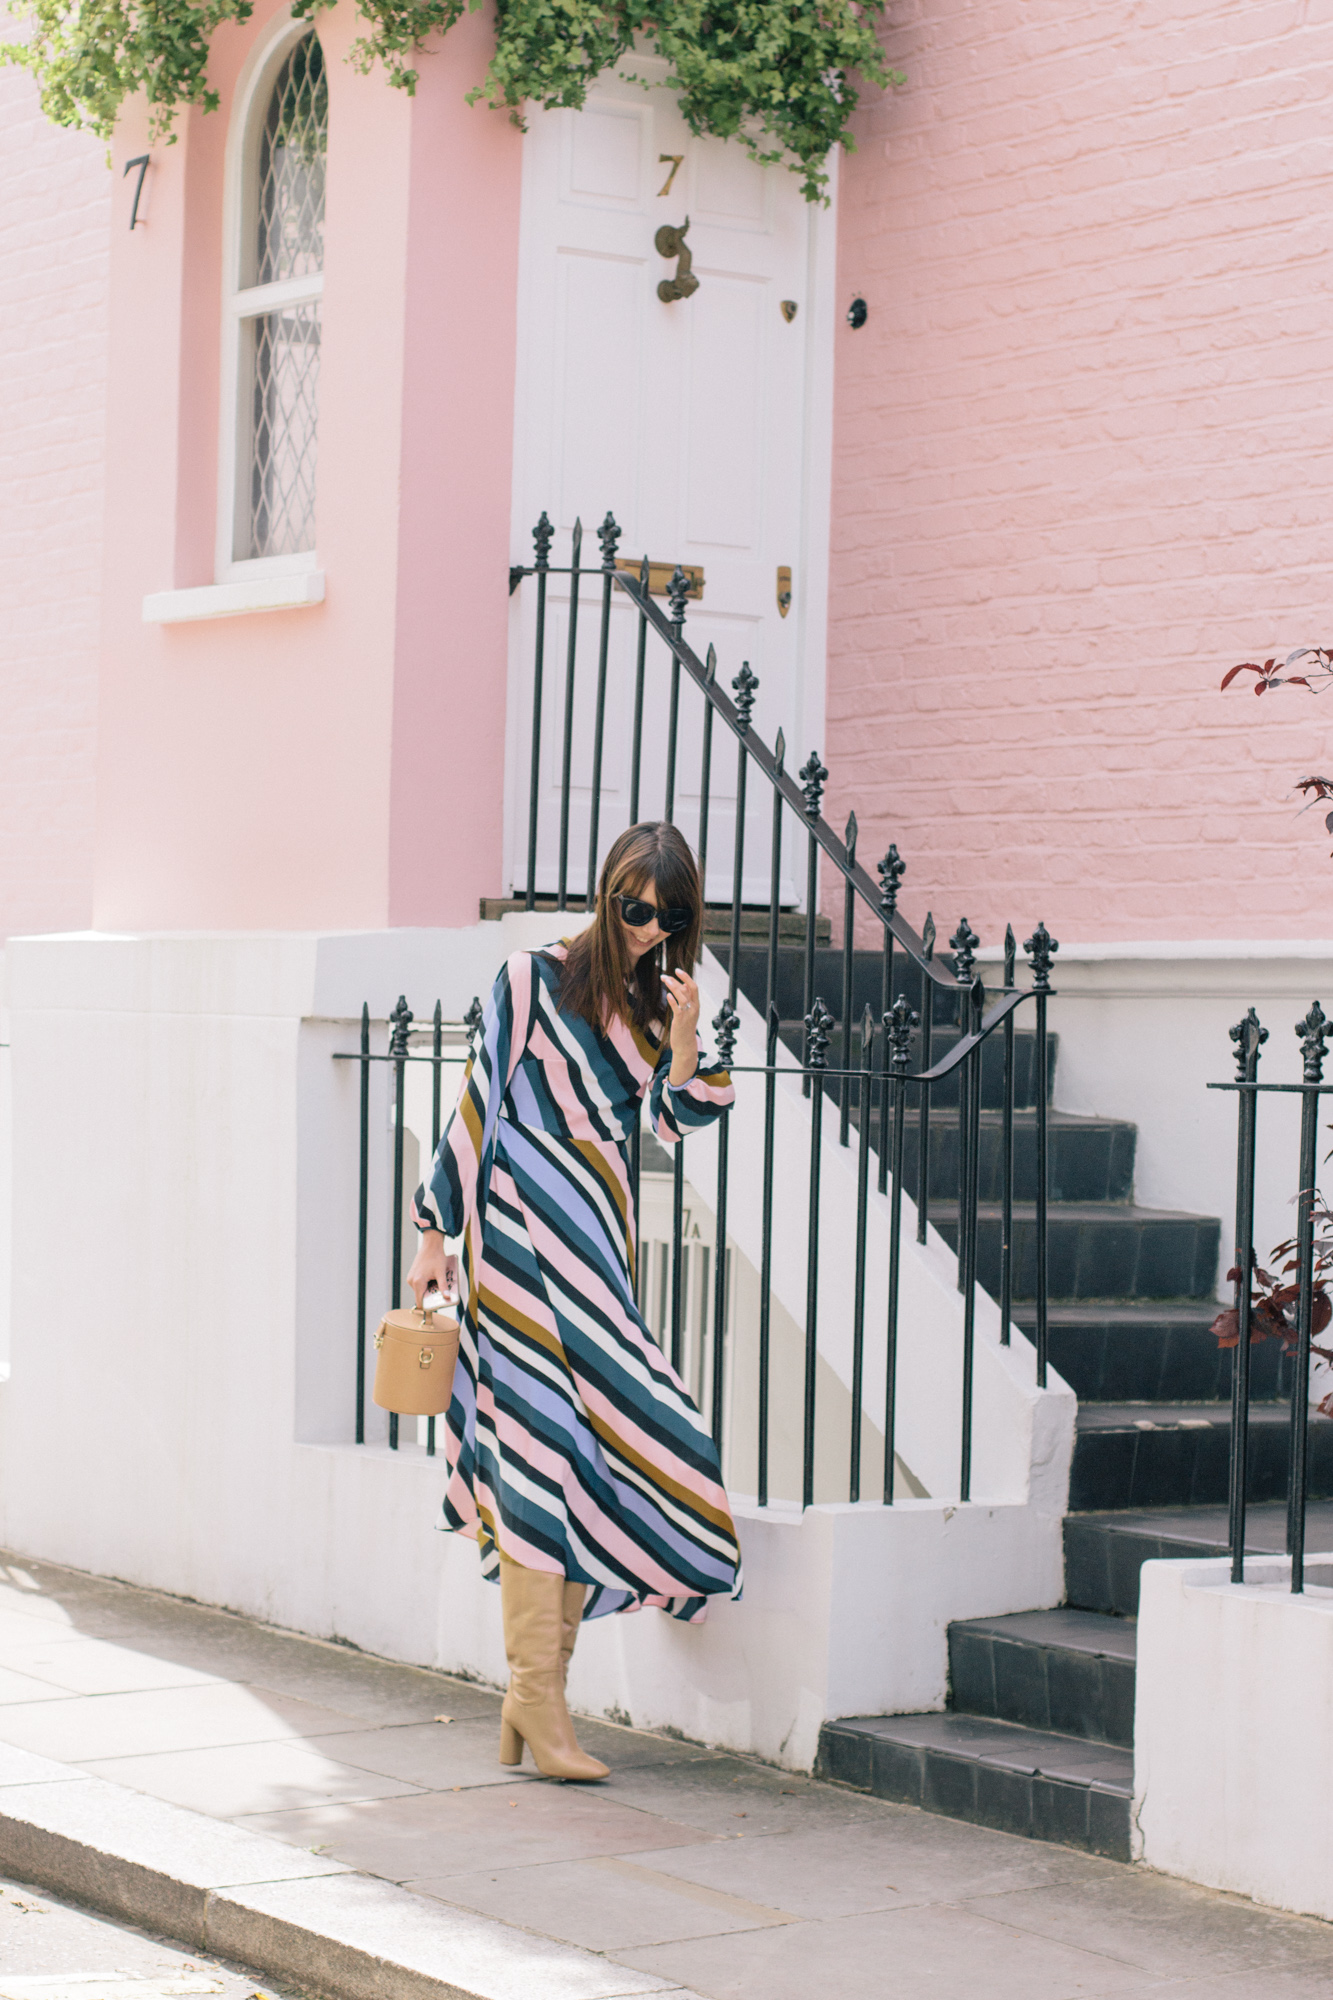 London Notting Hill Pink House outfit